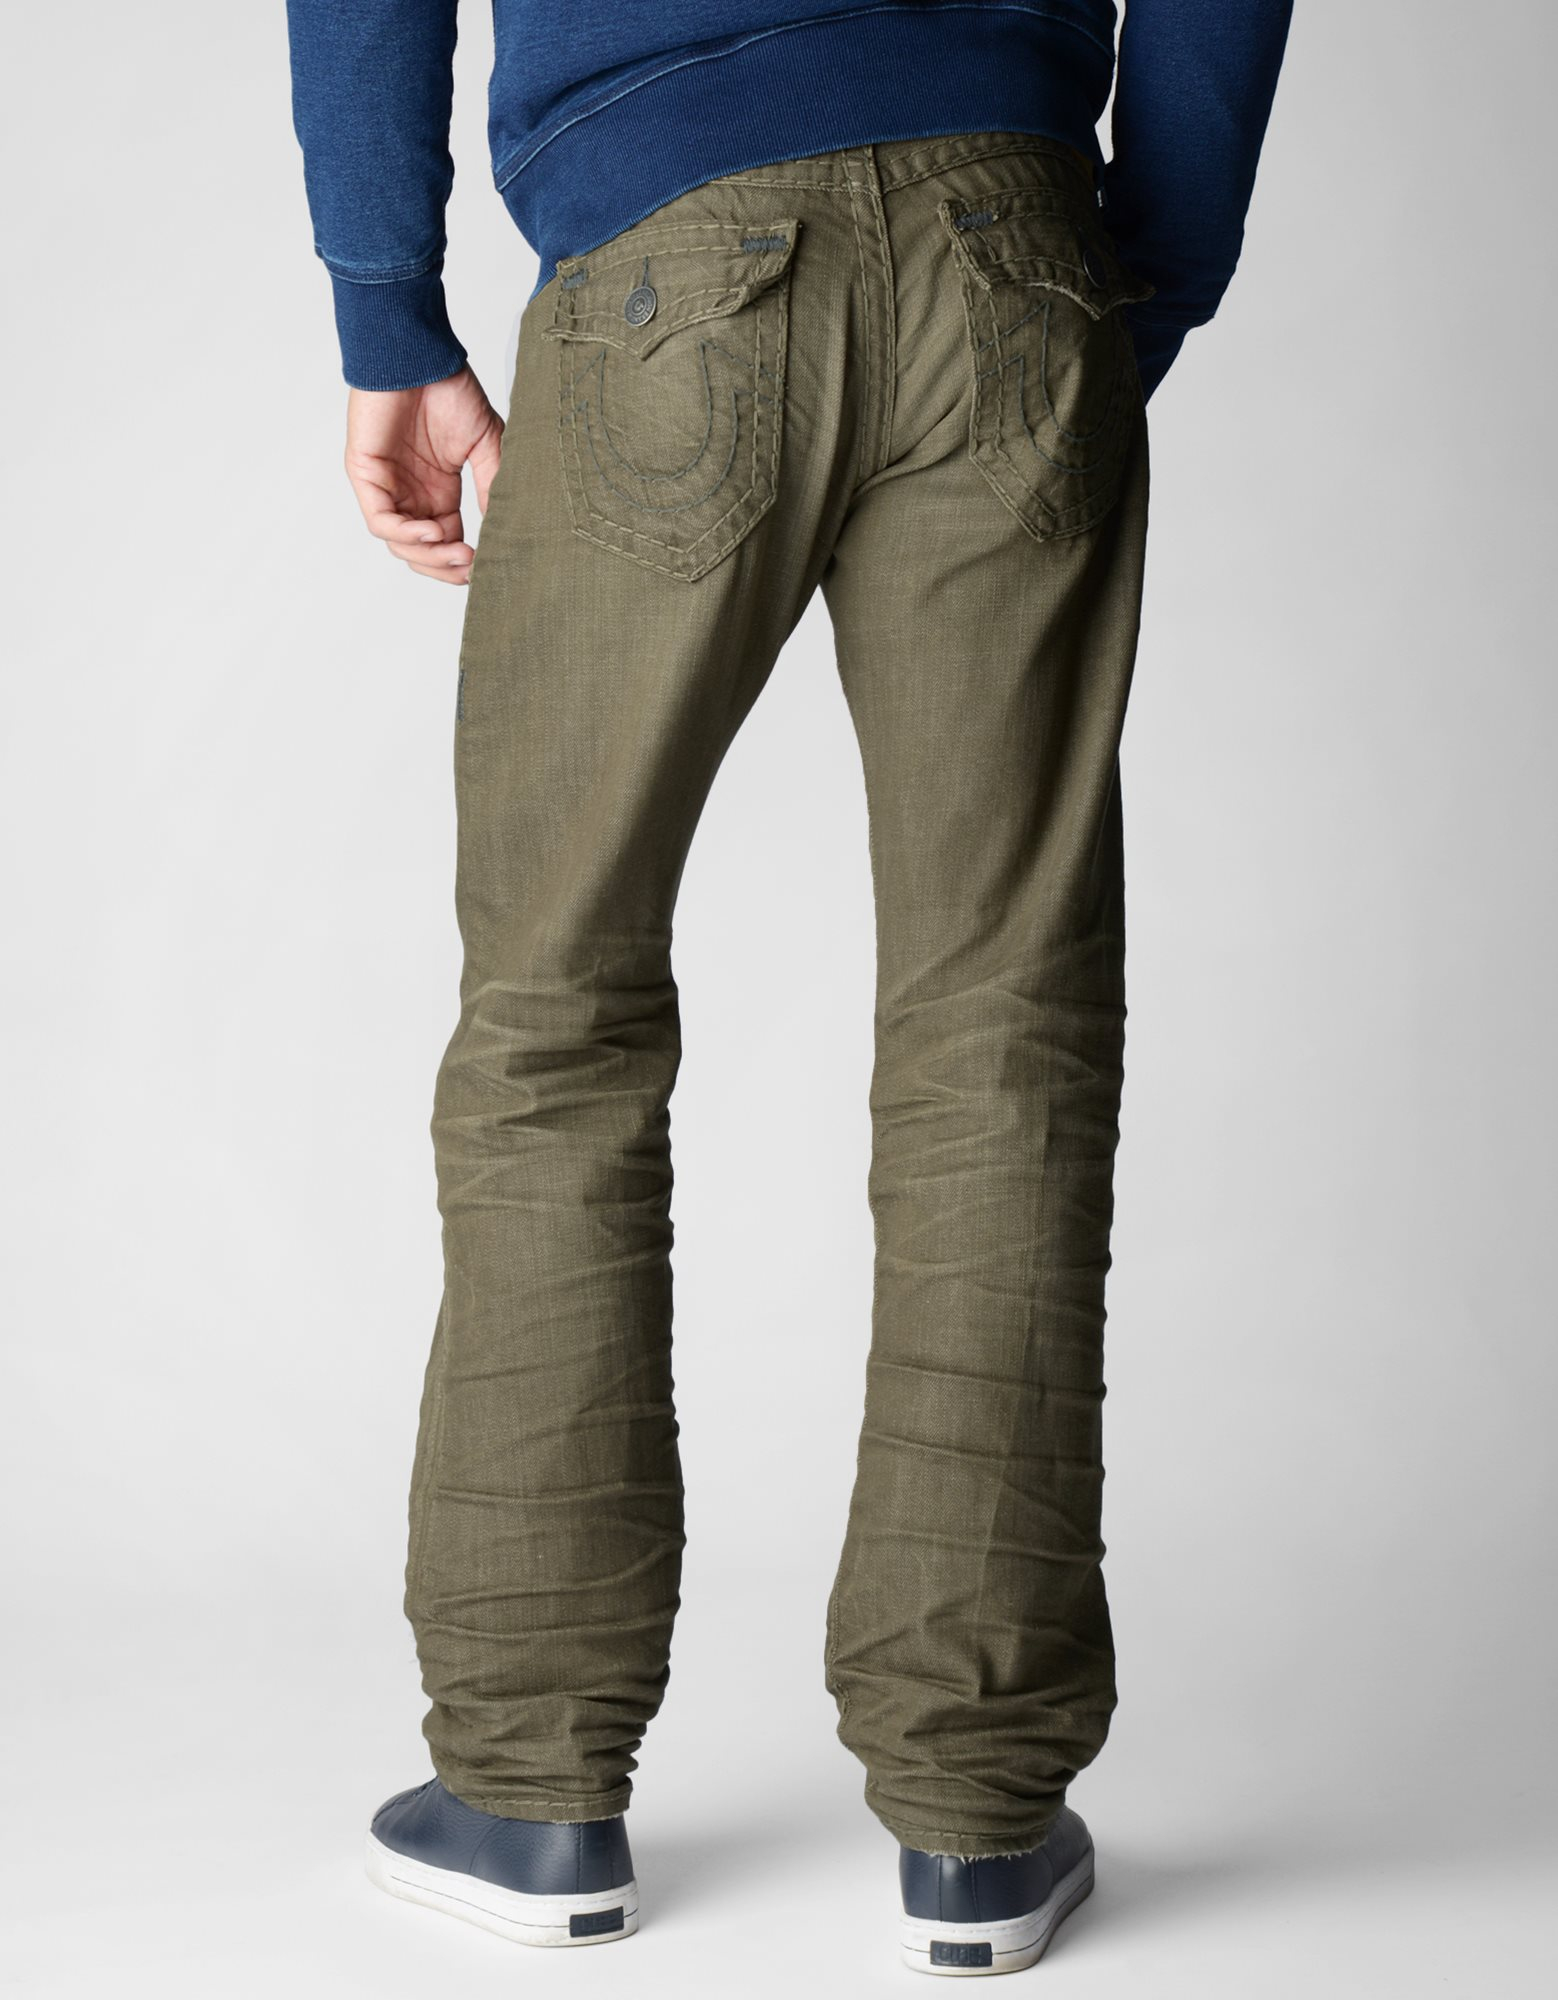 olive green true religion jeans